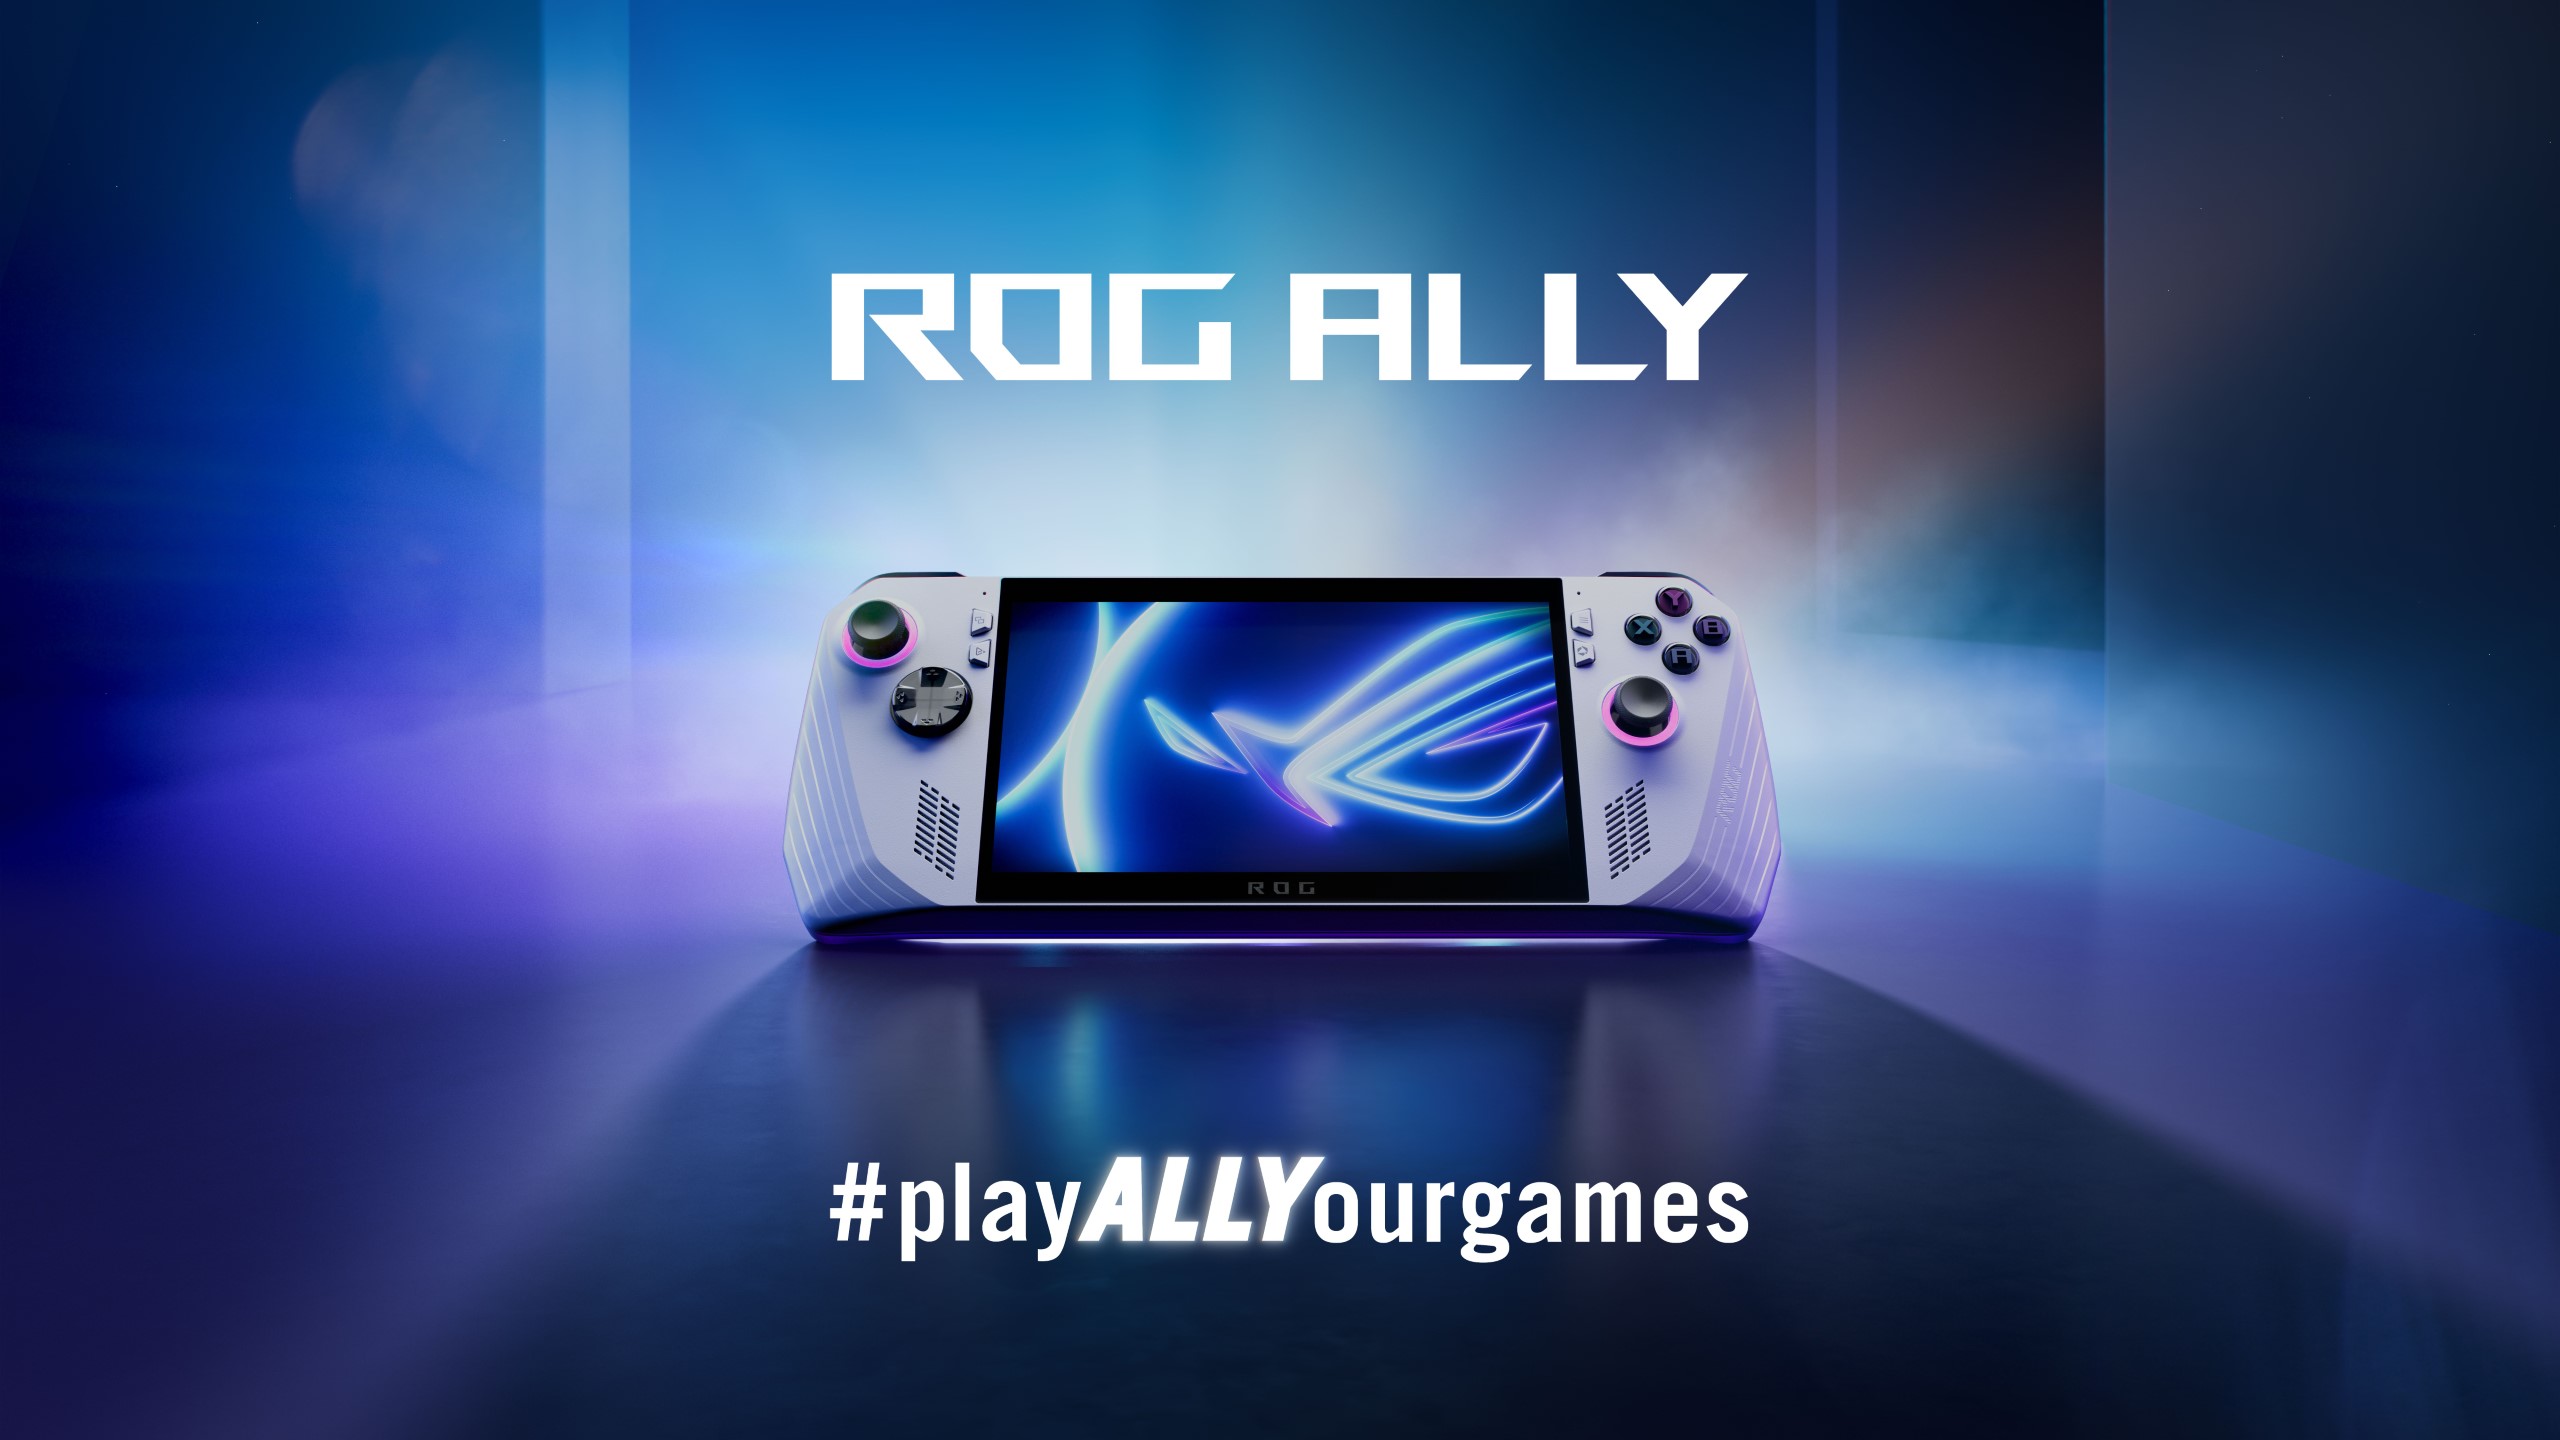 ASUS Officially Takes The Wraps Off Its New ROG Ally Gaming Handheld